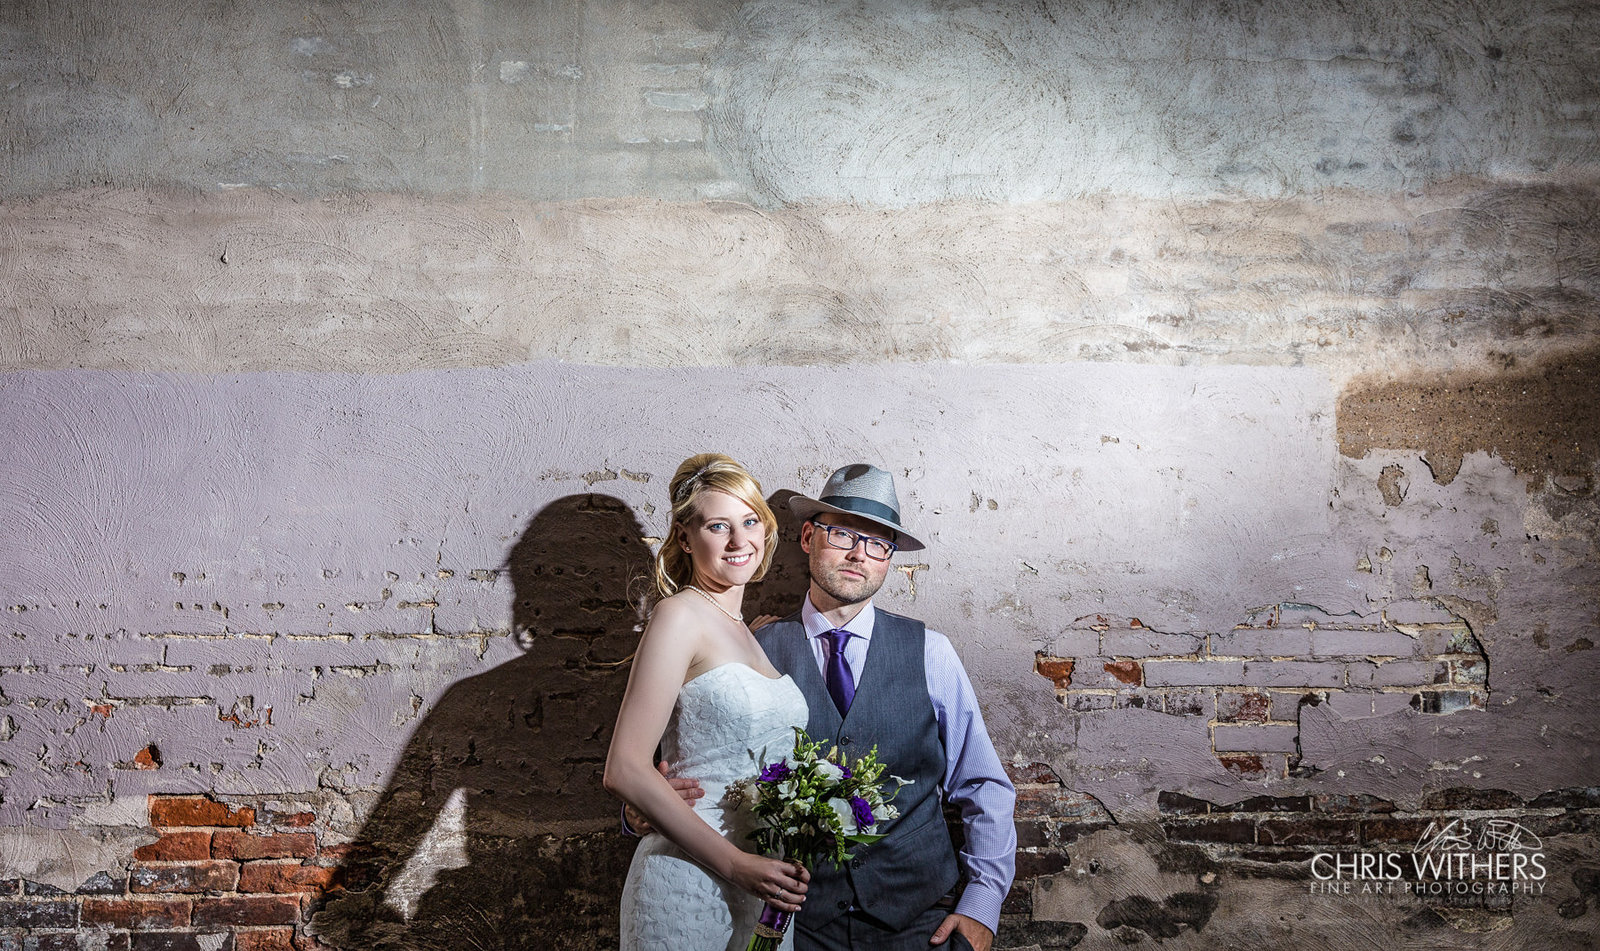 Springfield Illinois Wedding Photographer - Chris Withers Photography (34 of 159)